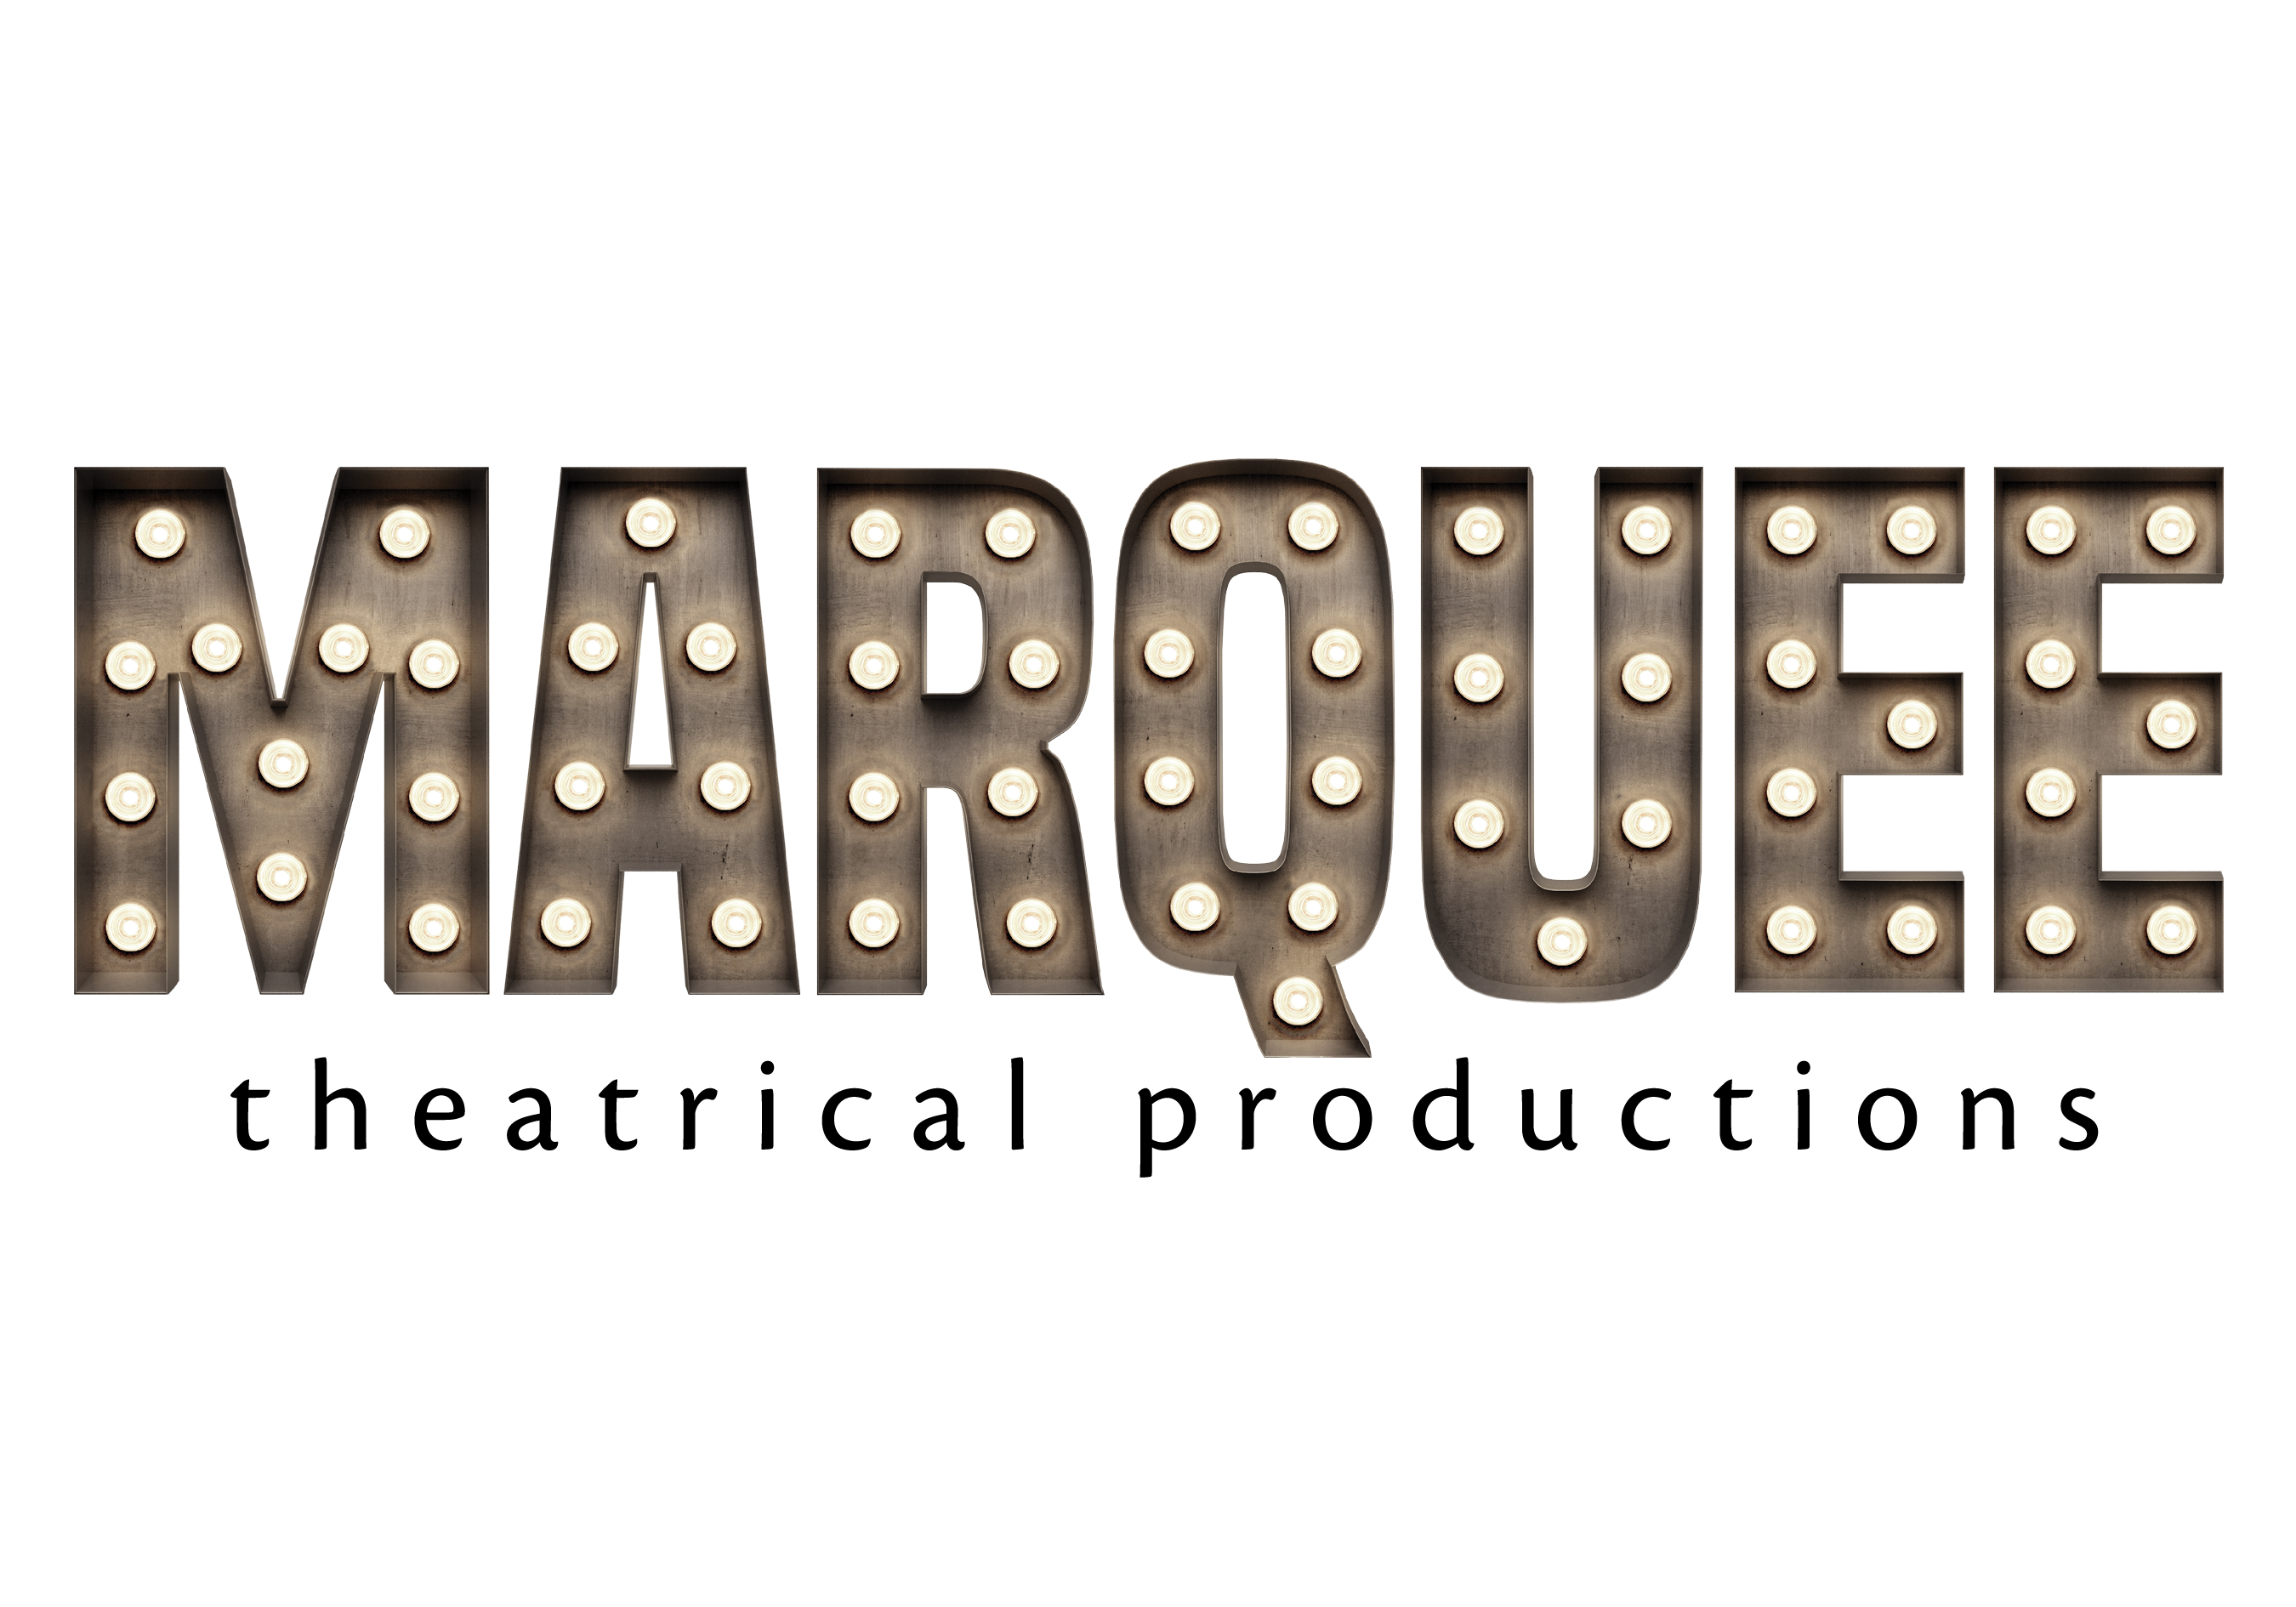 Marquee Theatrical Productions